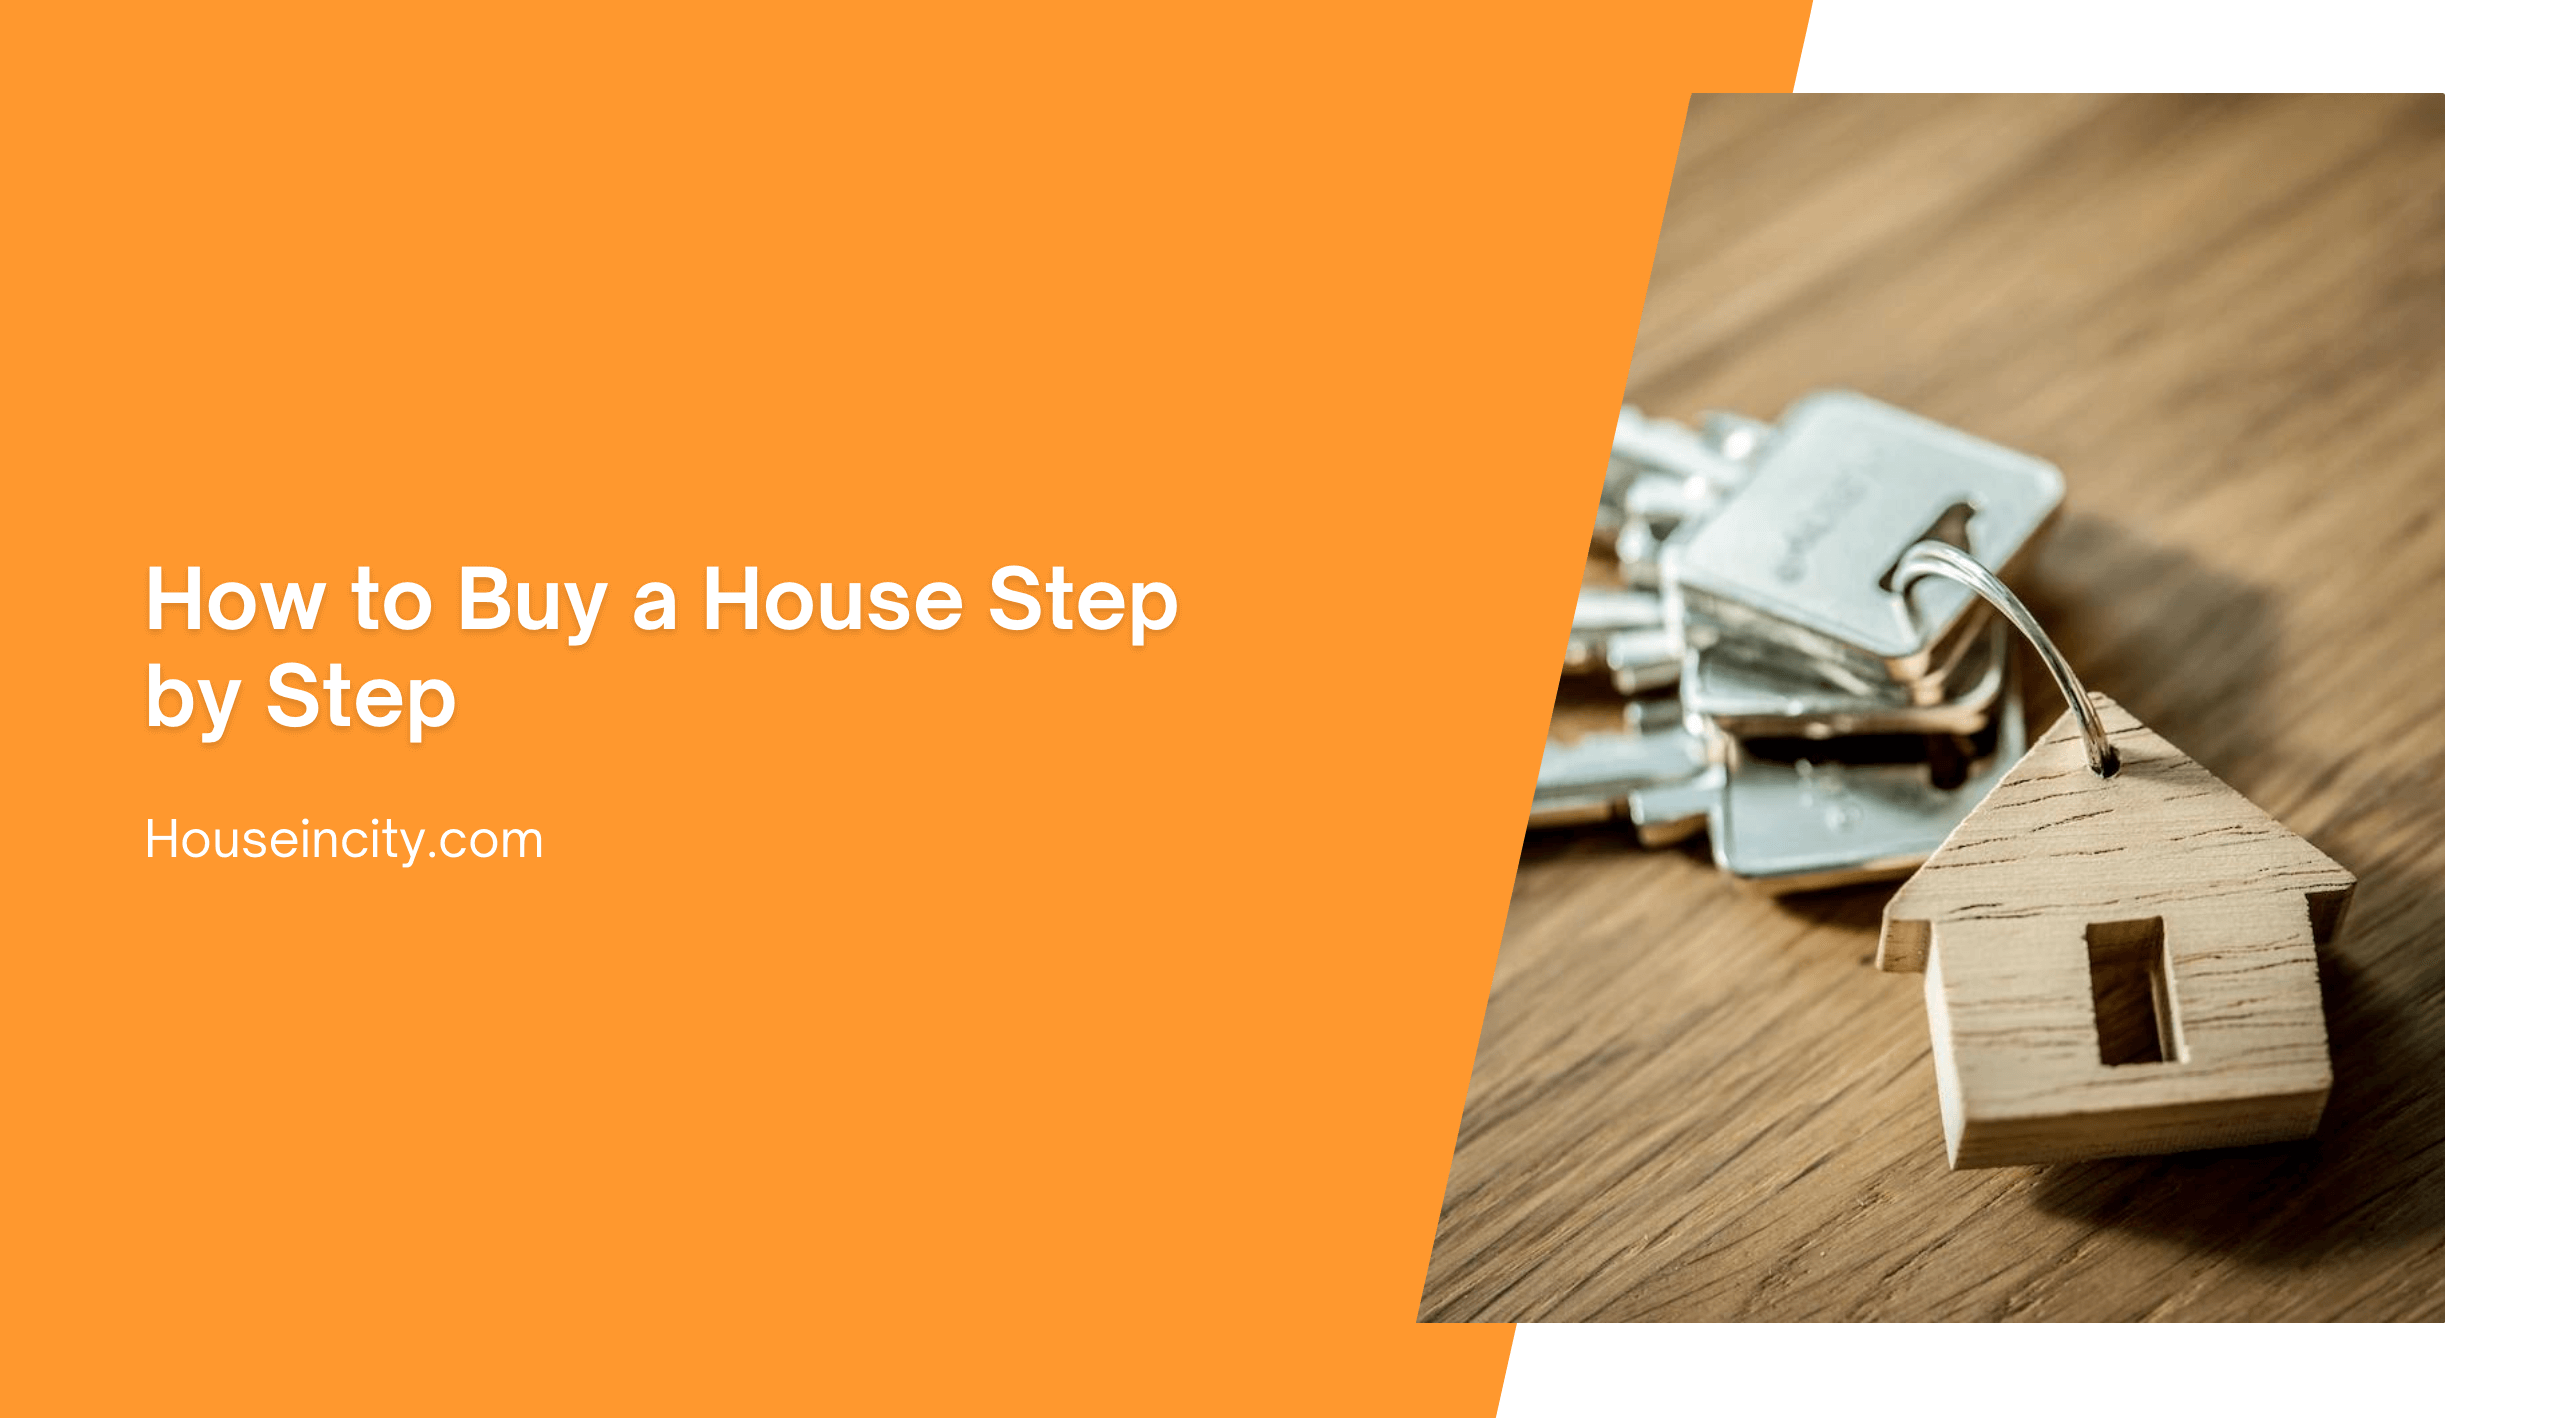 How to Buy a House Step by Step